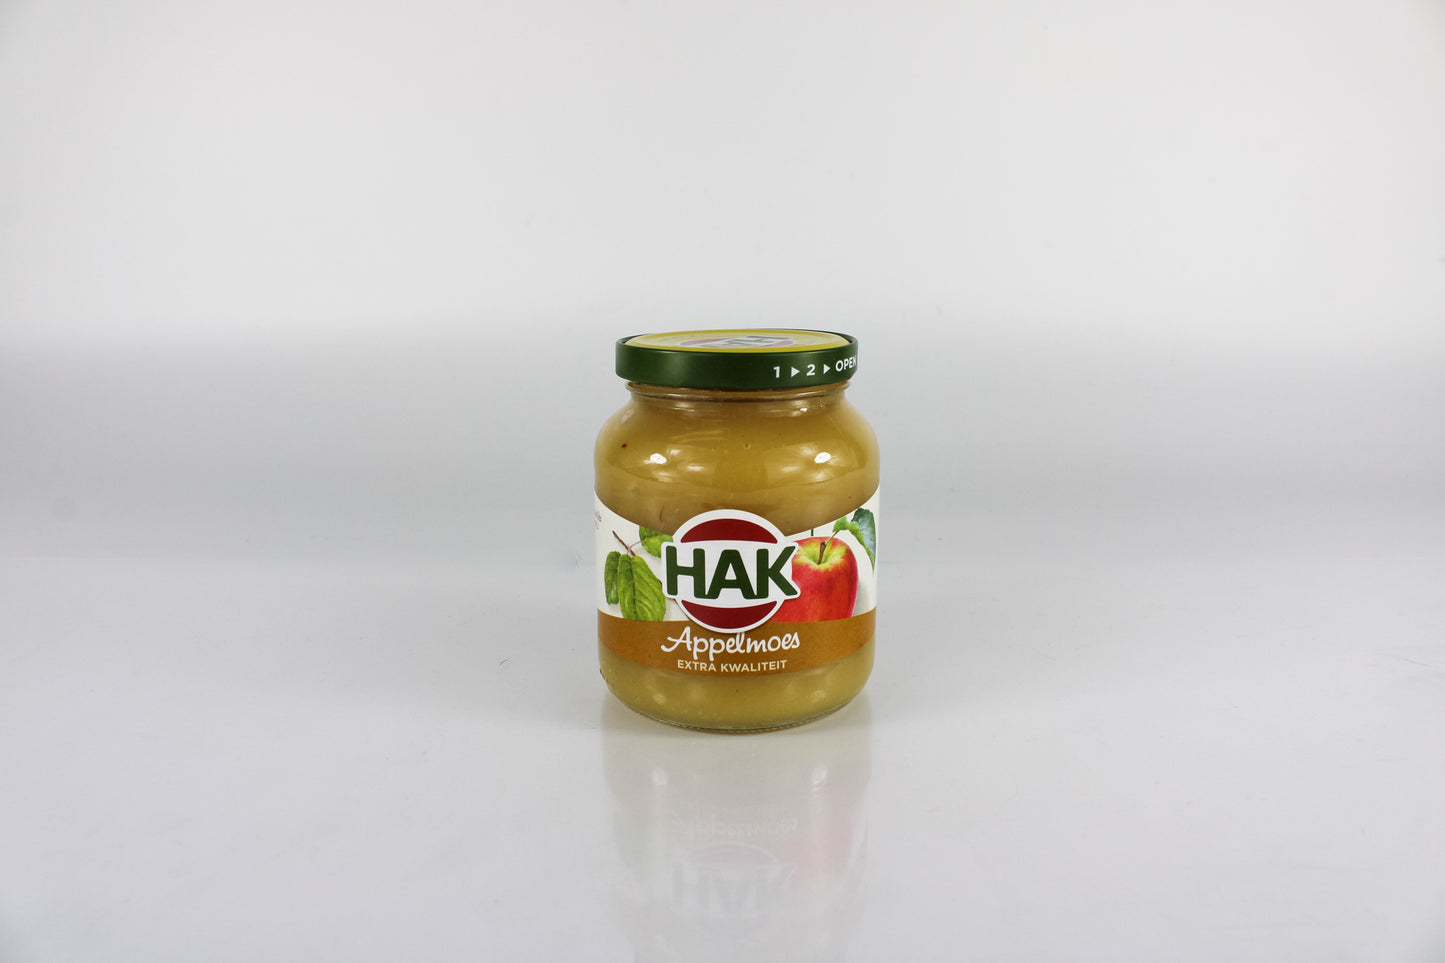 Hak Apple Sauces Small 355g (Appelmoes)